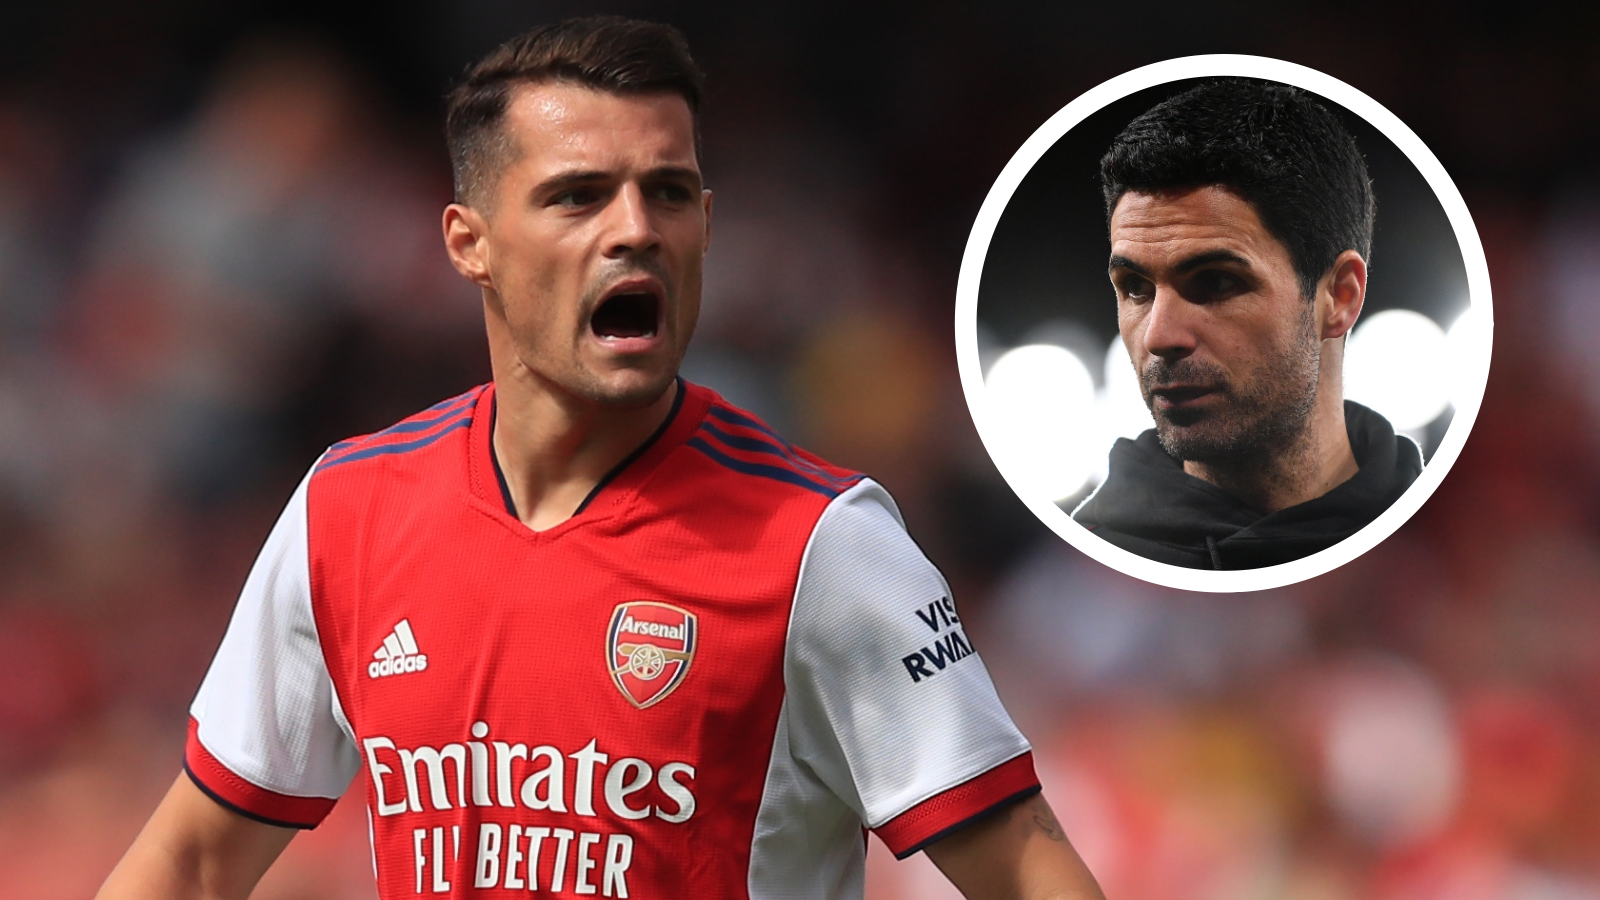 ‘Xhaka is staying at Arsenal’ - Arteta confirms Roma move is off